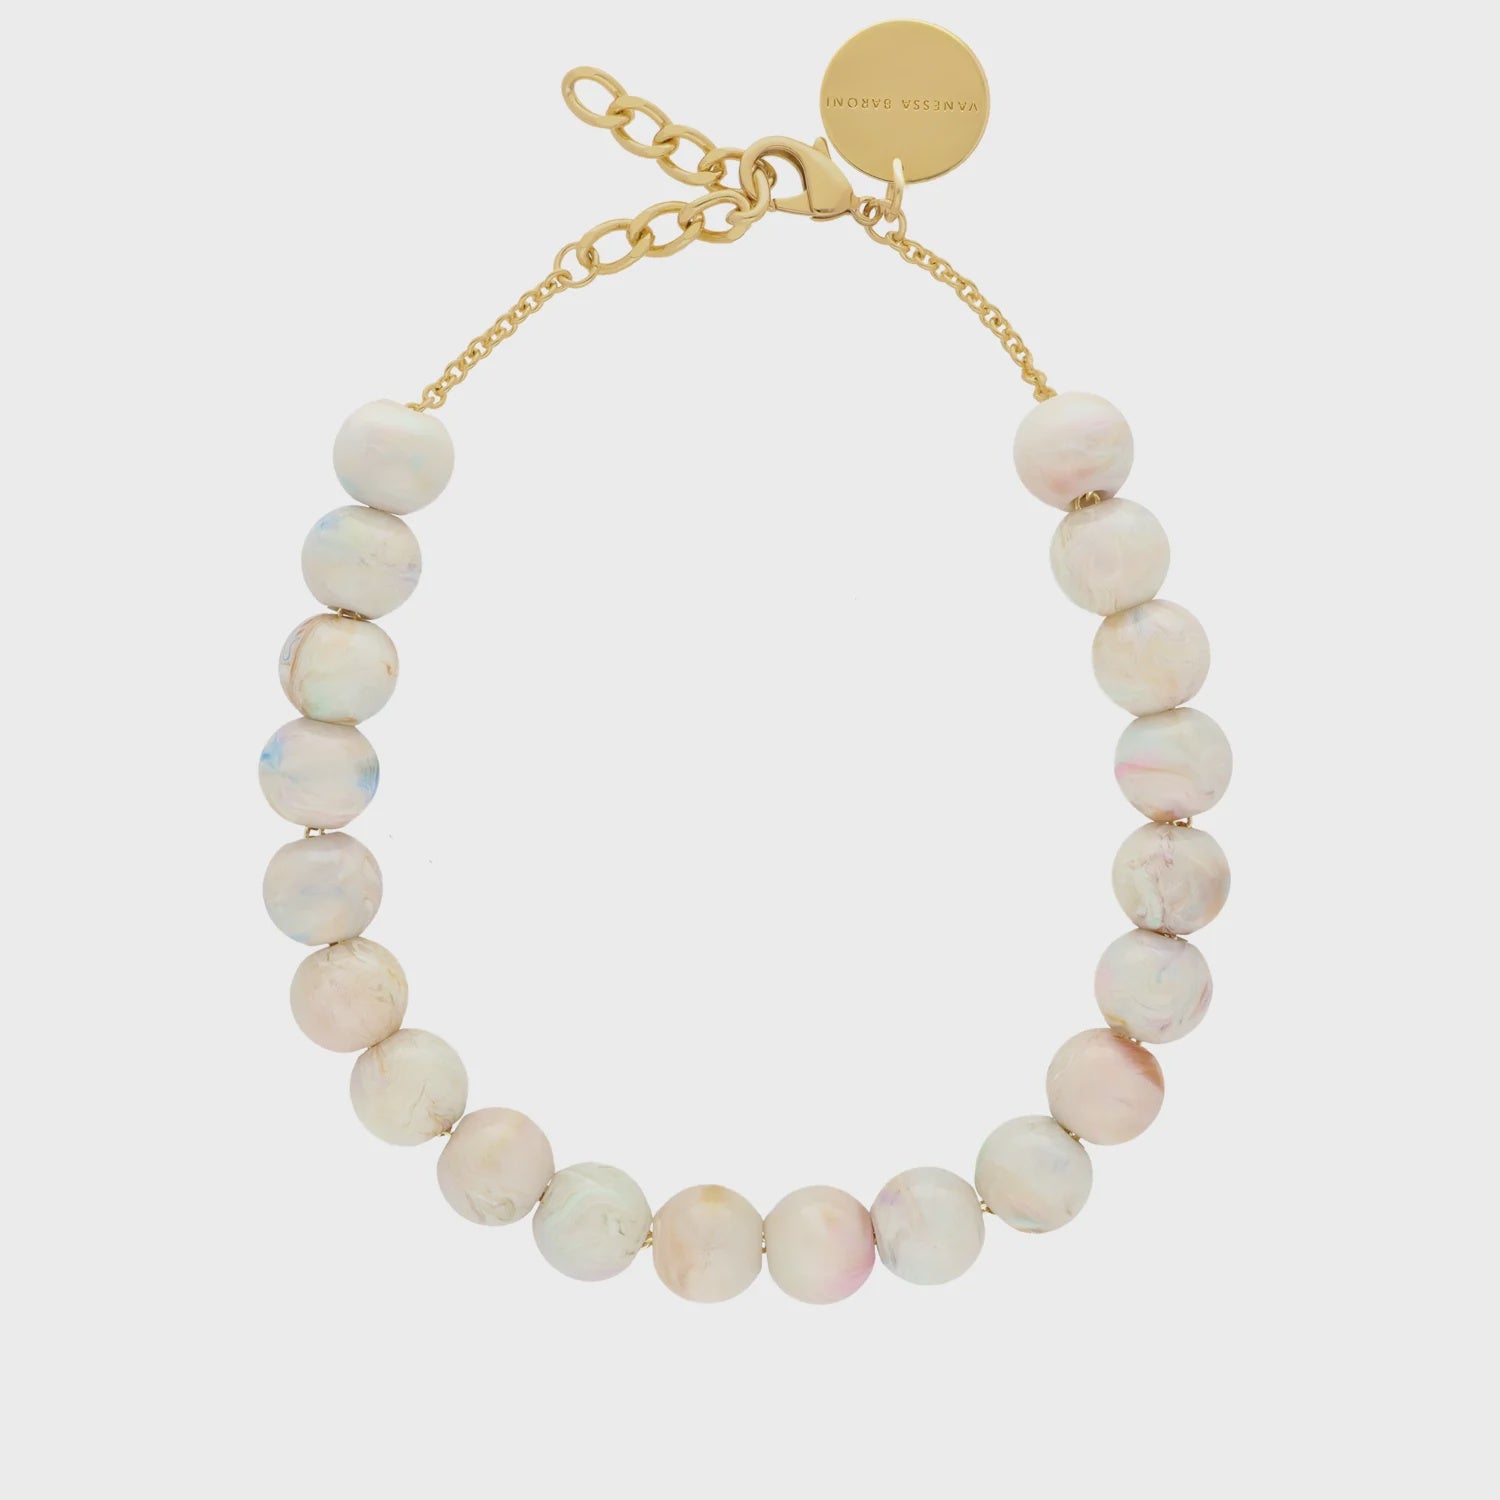 Small Beads Necklace - Multicolour Neutral